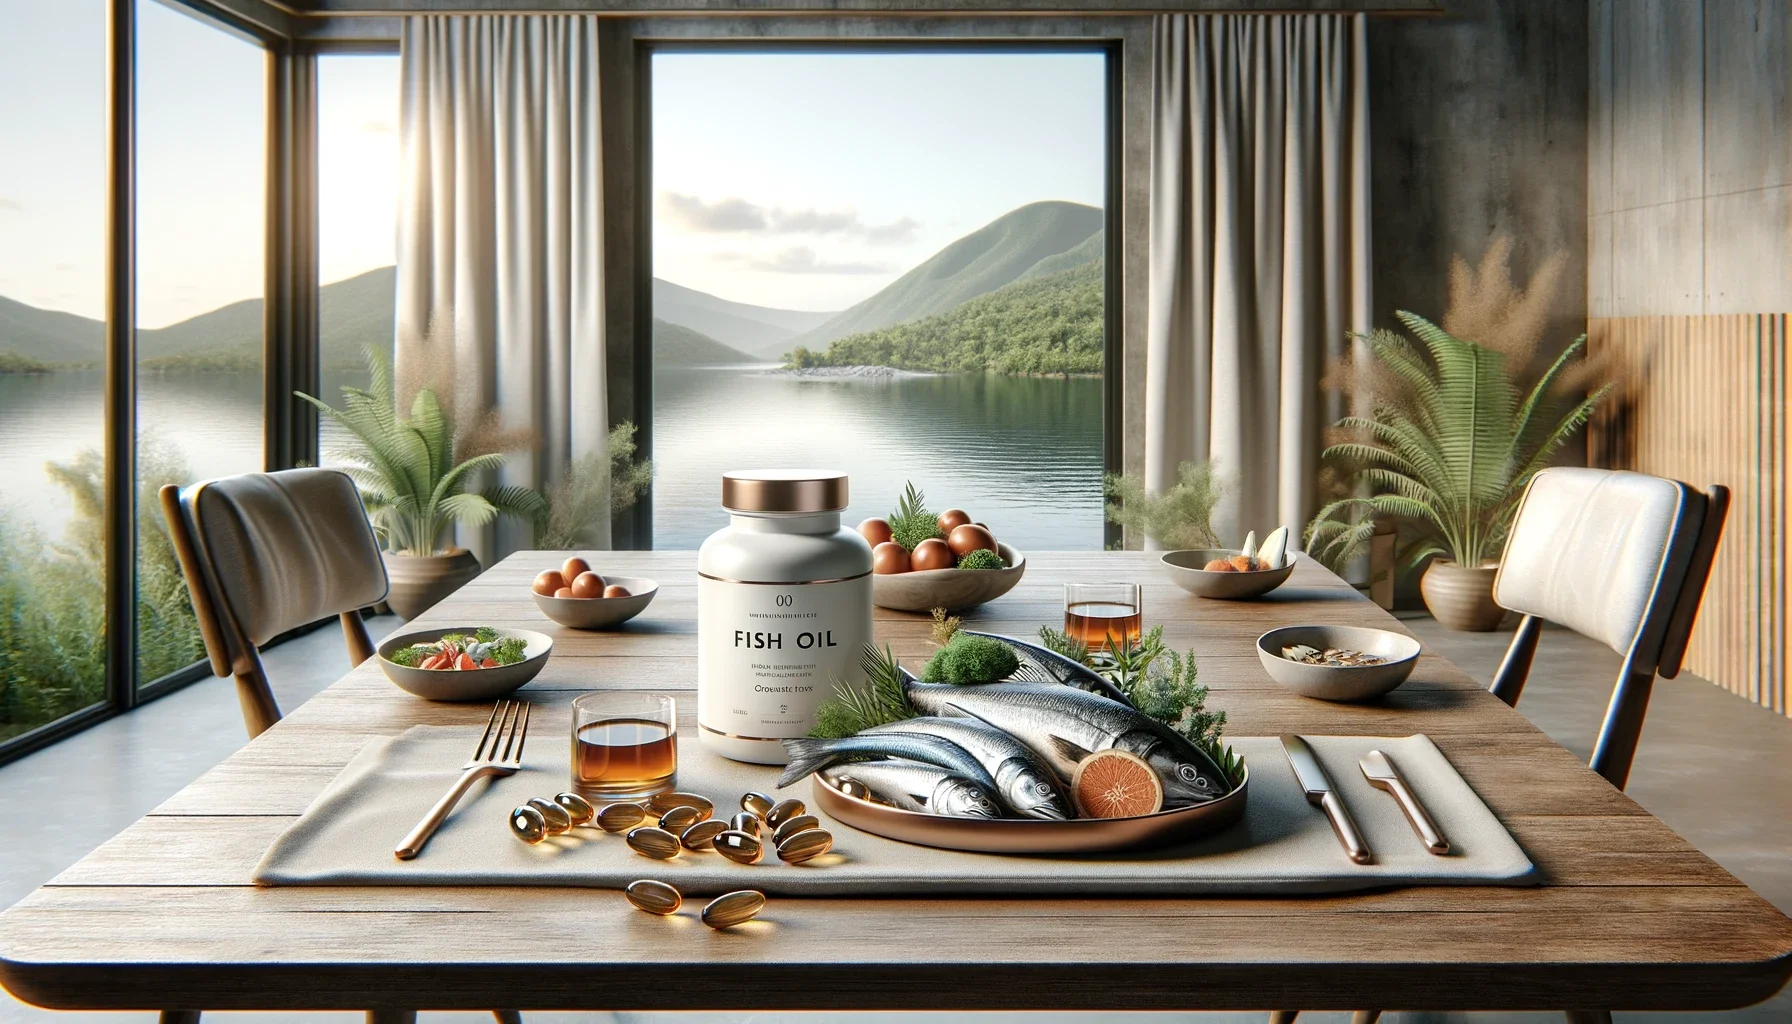 Modern dining room with lake view, showcasing dishes of omega-3 rich wild-caught fish and a bottle of fish oil capsules, emphasizing a healthy lifestyle